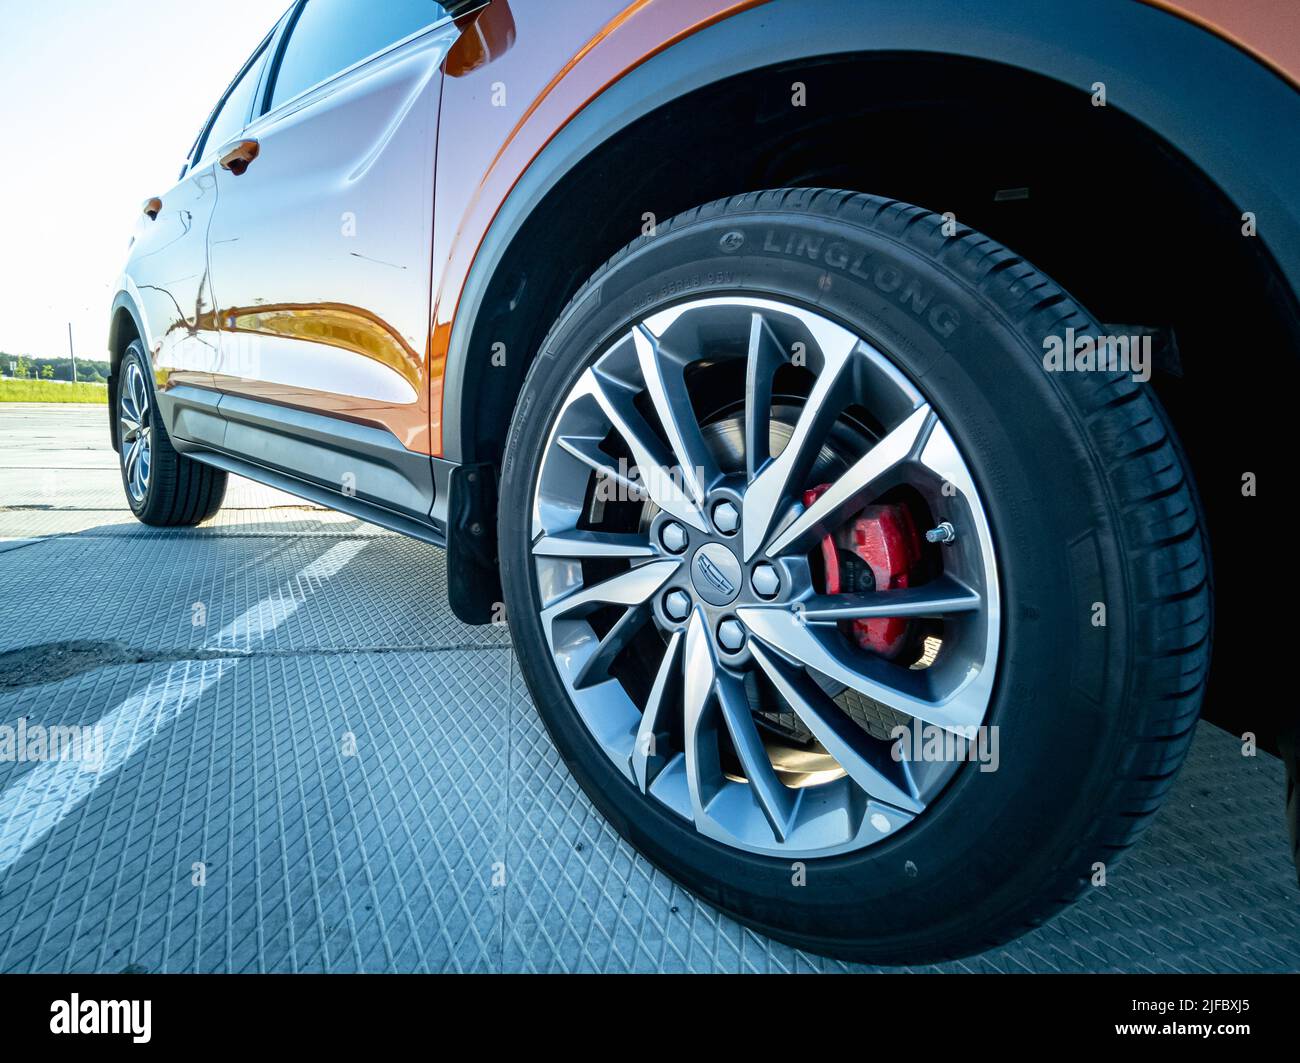 Minsk, Belarus - June 2022: close-up of a Geely Coolray car orange wheel. Stock Photo